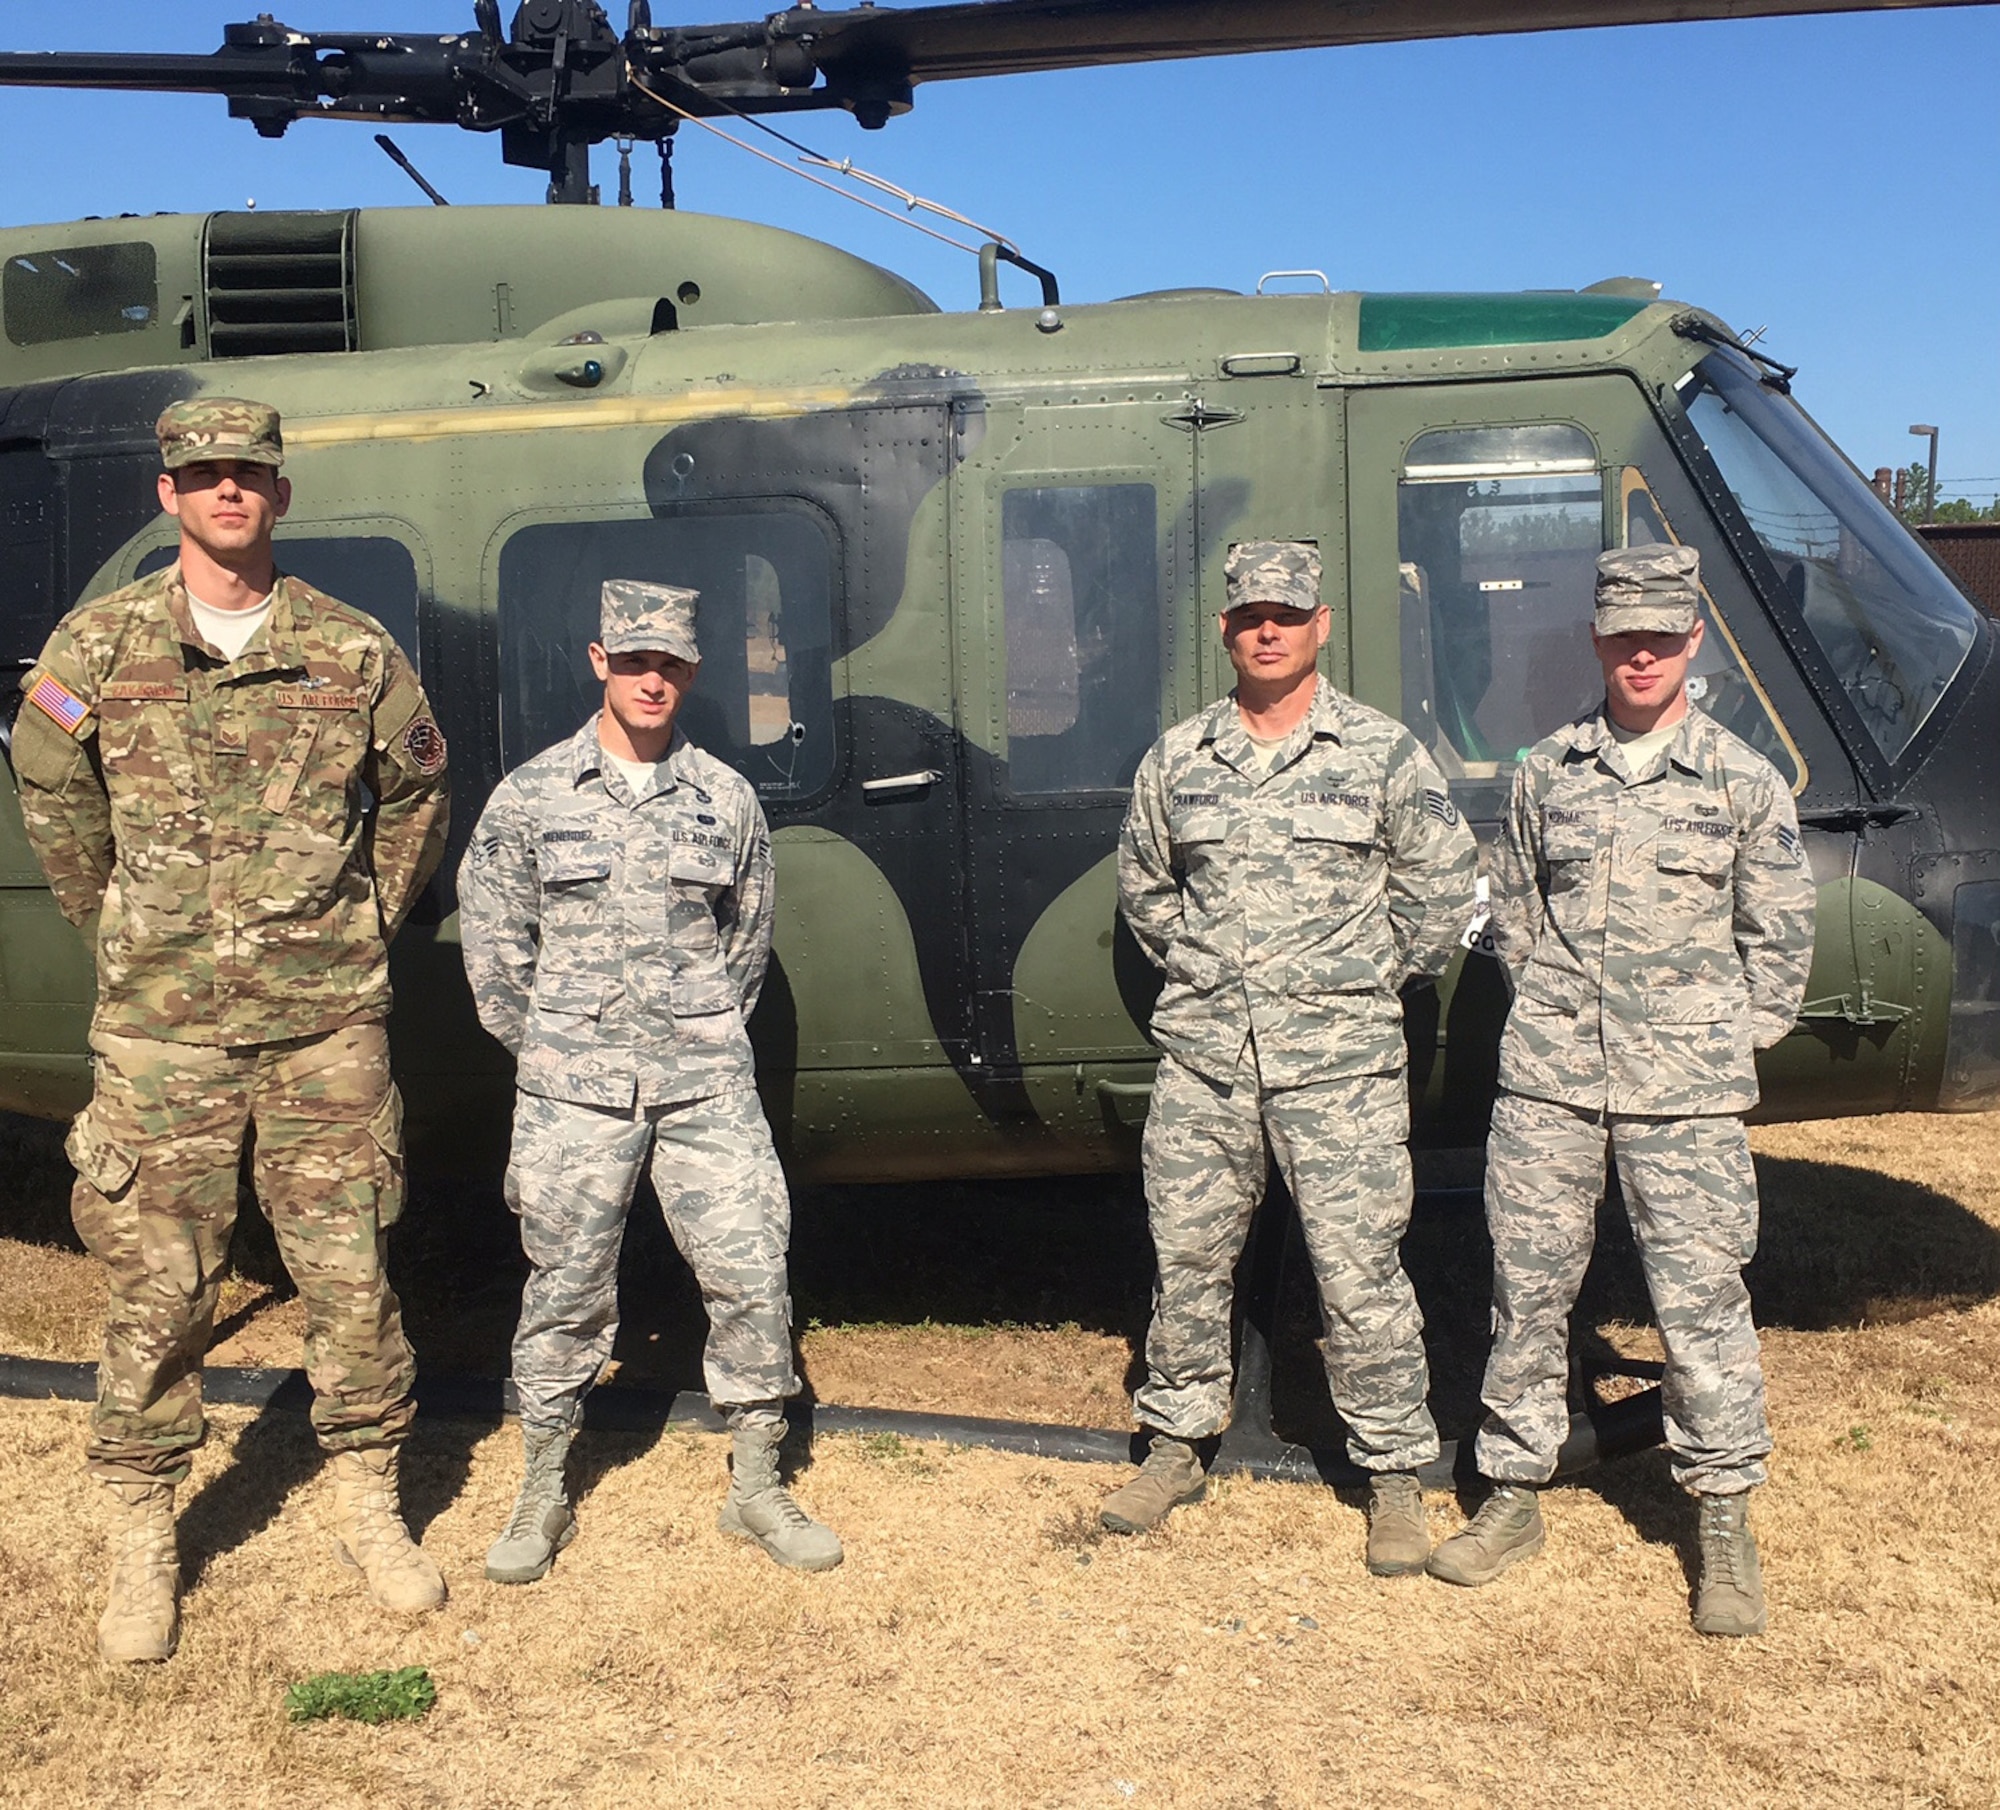 Staff Sgt. Kurtis Crawford (center right) and Senior Airman Tyler McPhail (right), both assigned to the 512th Airlift Control Flight, Dover Air Force Base, Del., graduated Nov. 18, 2016, from the Army’s Air Assault School at Ft. Benning, Ga. Crawford, a C-17 loadmaster, and McPhail, a command and control specialist, are the first reserve airlift control flight members to complete the 12-day course designed to prepare Soldiers for air mobile operations. Also pictured are two active-duty Airmen who graduated in the same class; they are Staff Sgt. Phillip Zakarain, Moody Air Force Base, Ga., and Senior Airman Carlos Mendez, MacDill AFB, Fla. 
